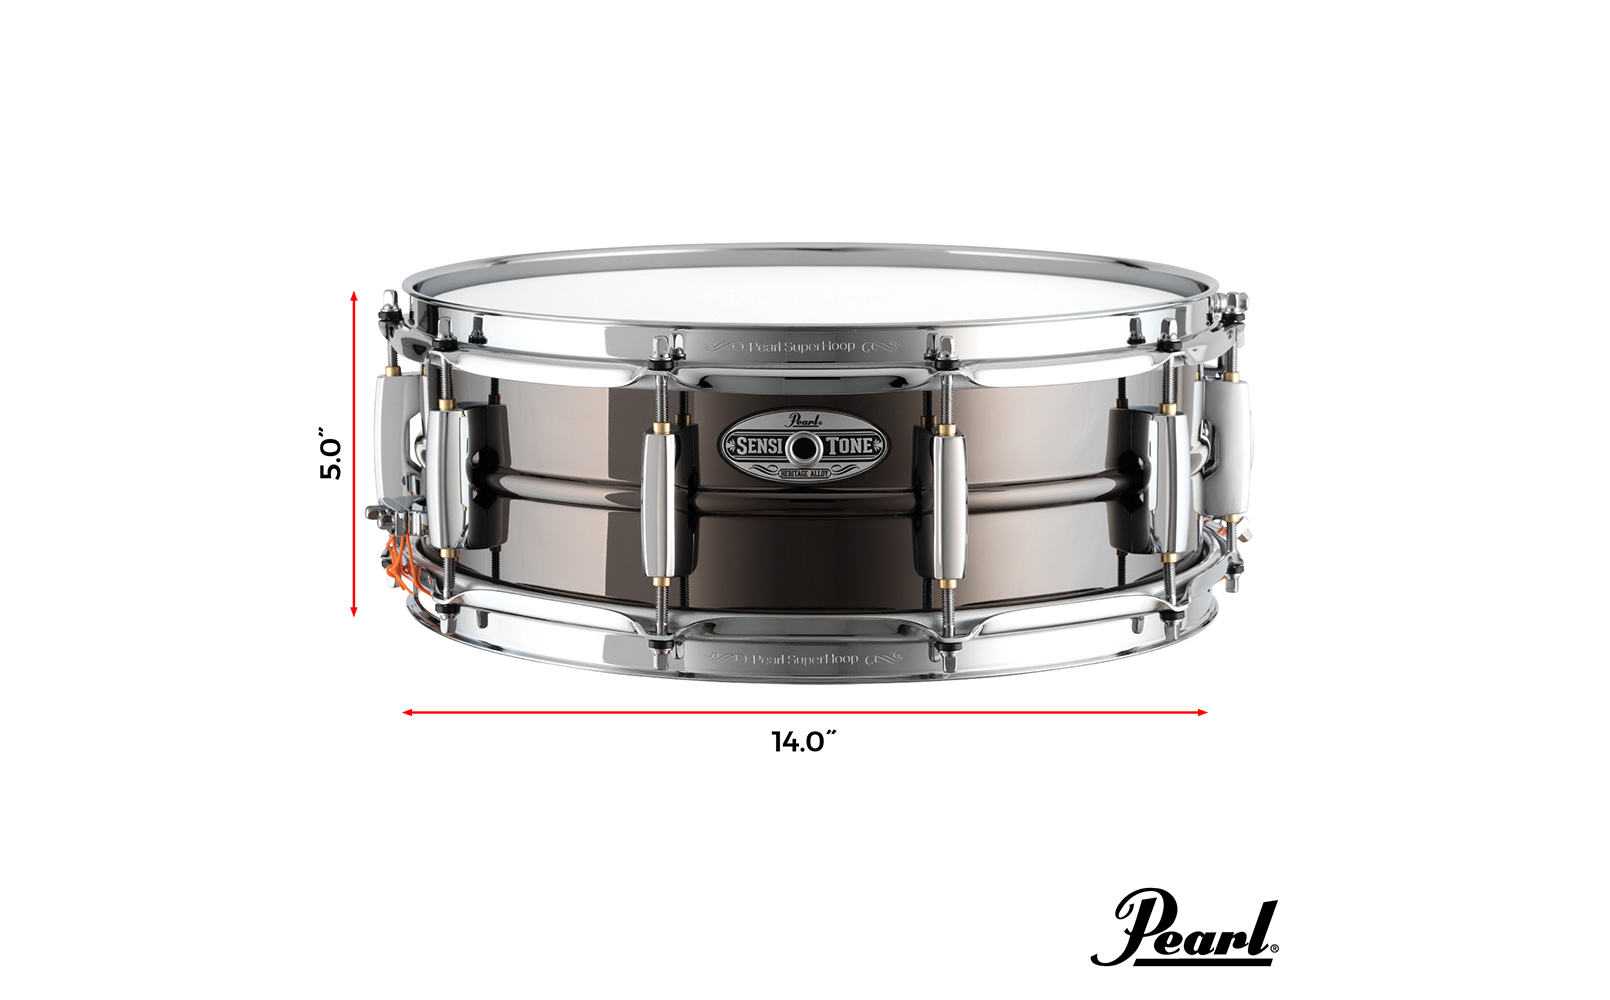 Pearl Drums Global Official on Instagram: The SensiTone Heritage Alloy  Brass drums feature a 1mm, black nickel-plated beaded brass shell:  delivering beautiful, timeless tones with enough sonic flexibility to make  them fit